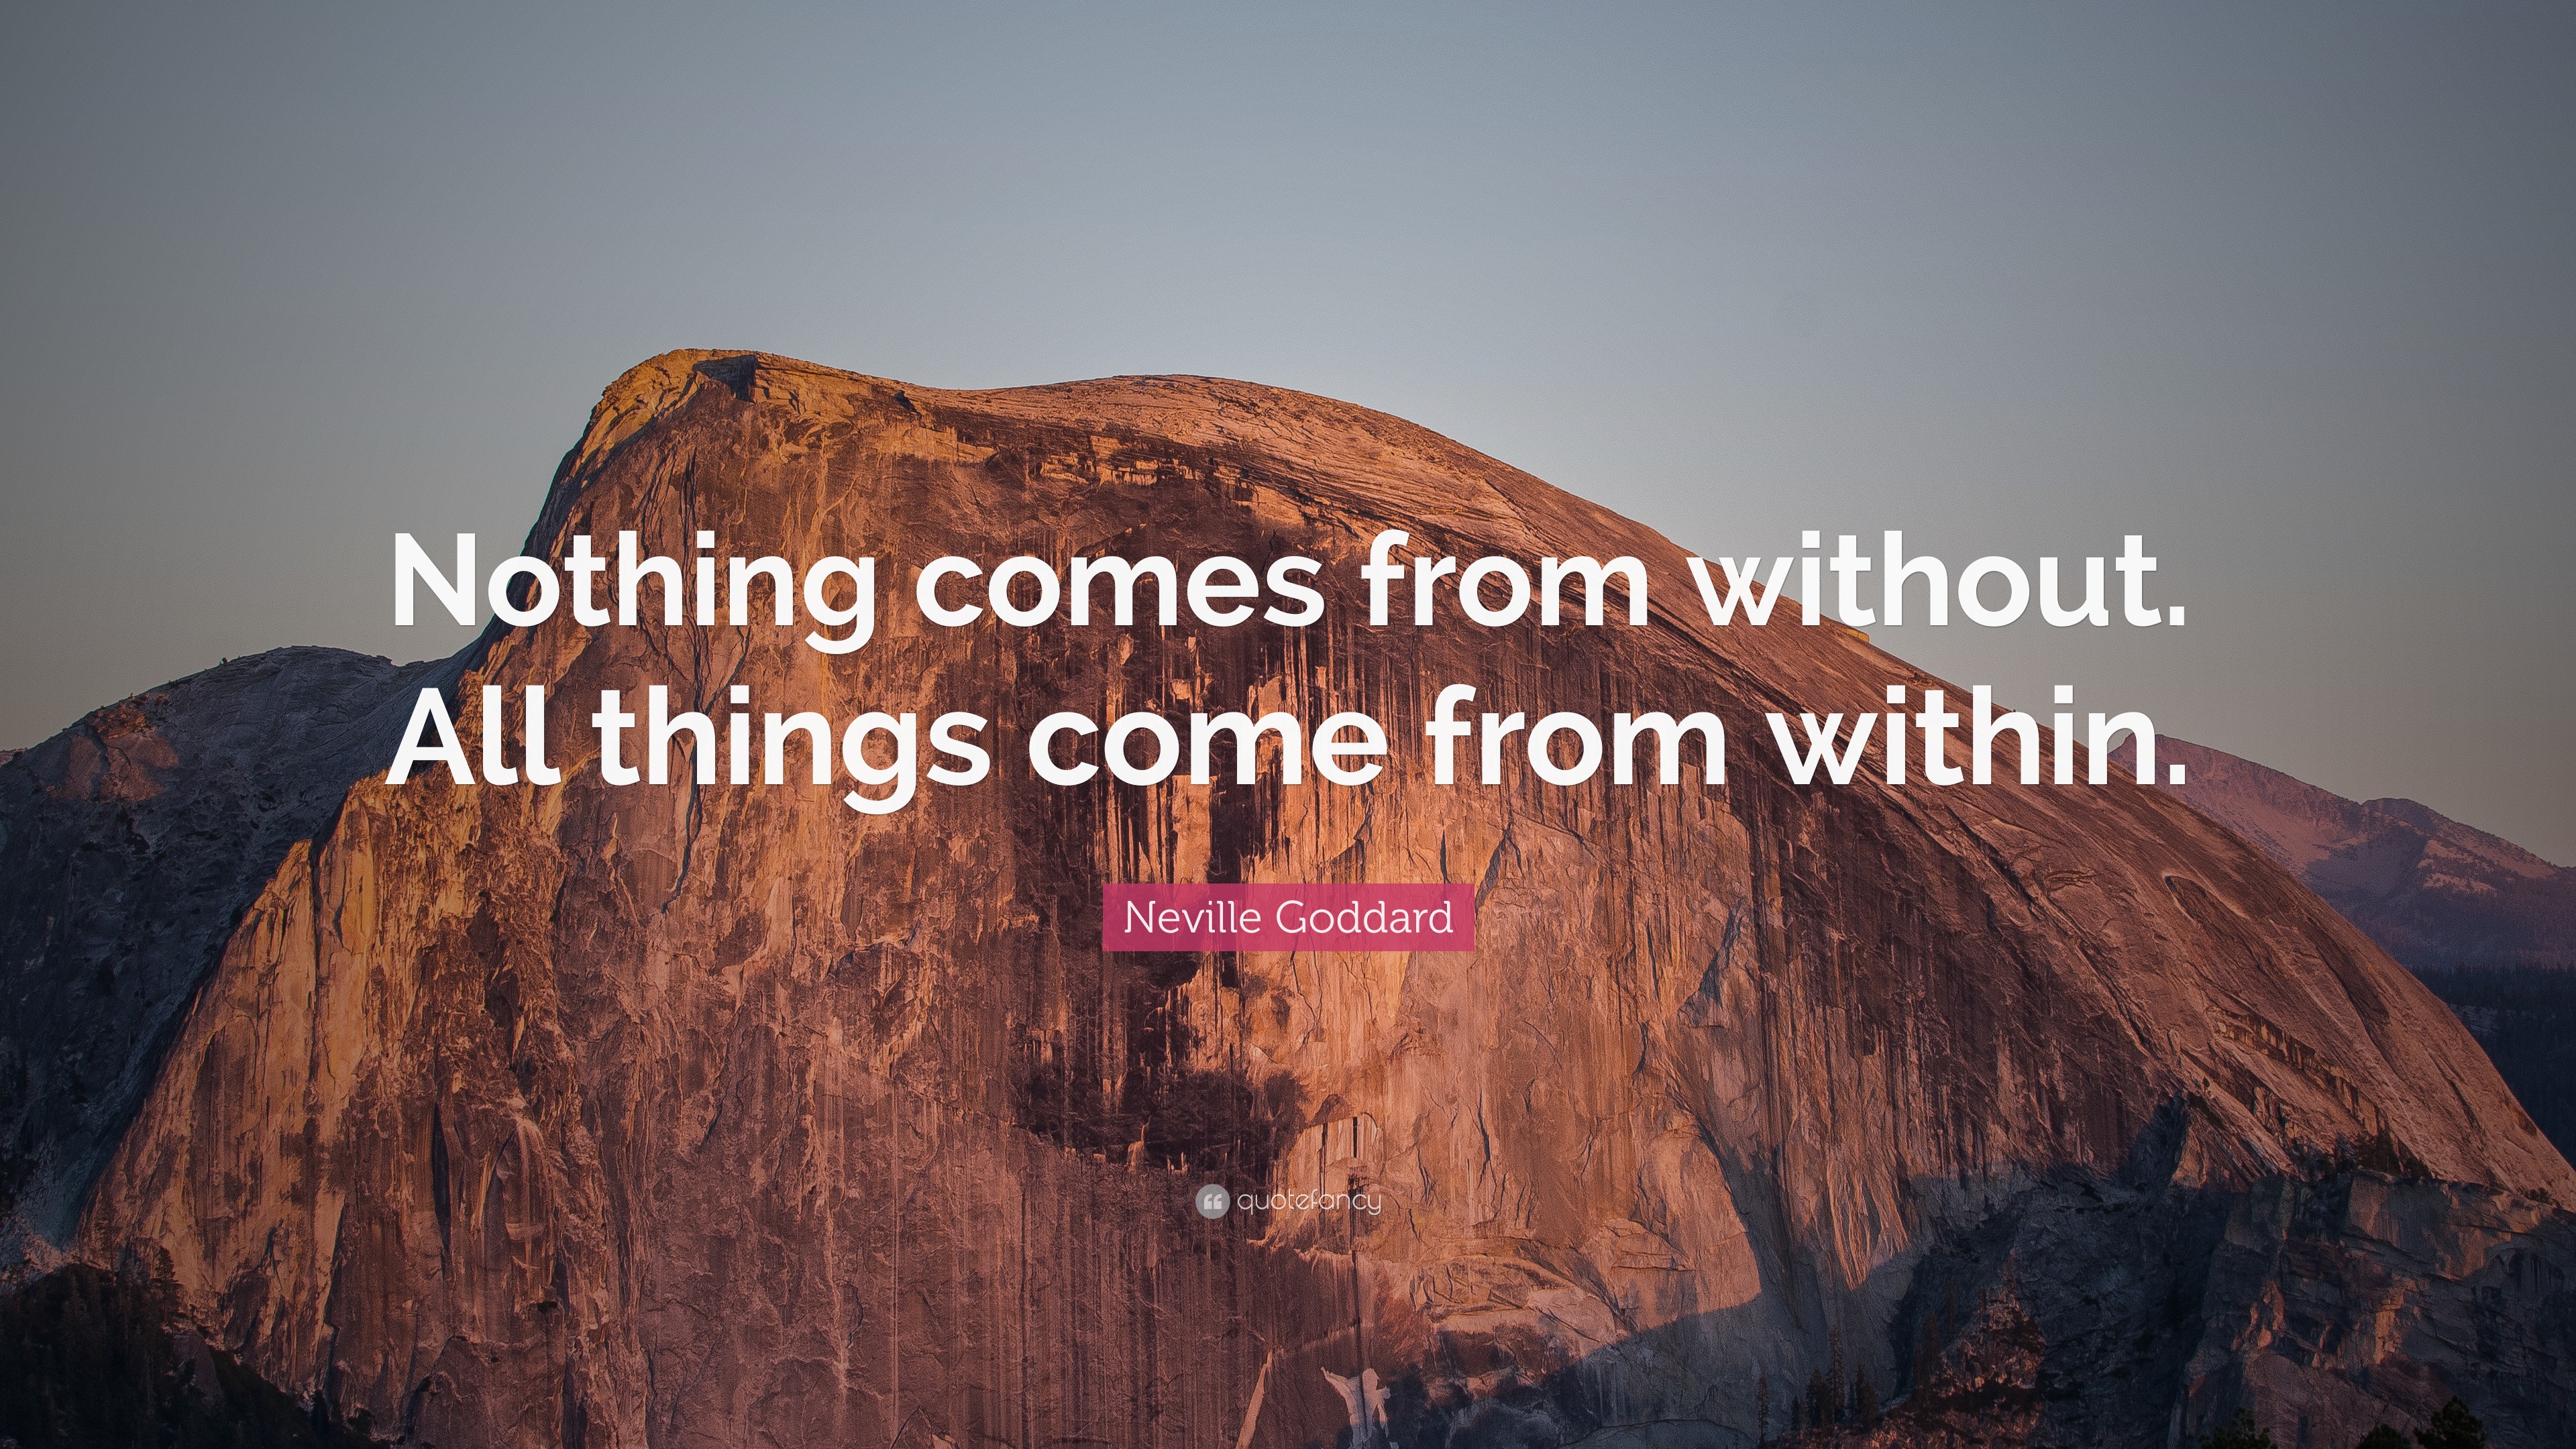 Neville Goddard Quote: “Nothing comes from without. All things come